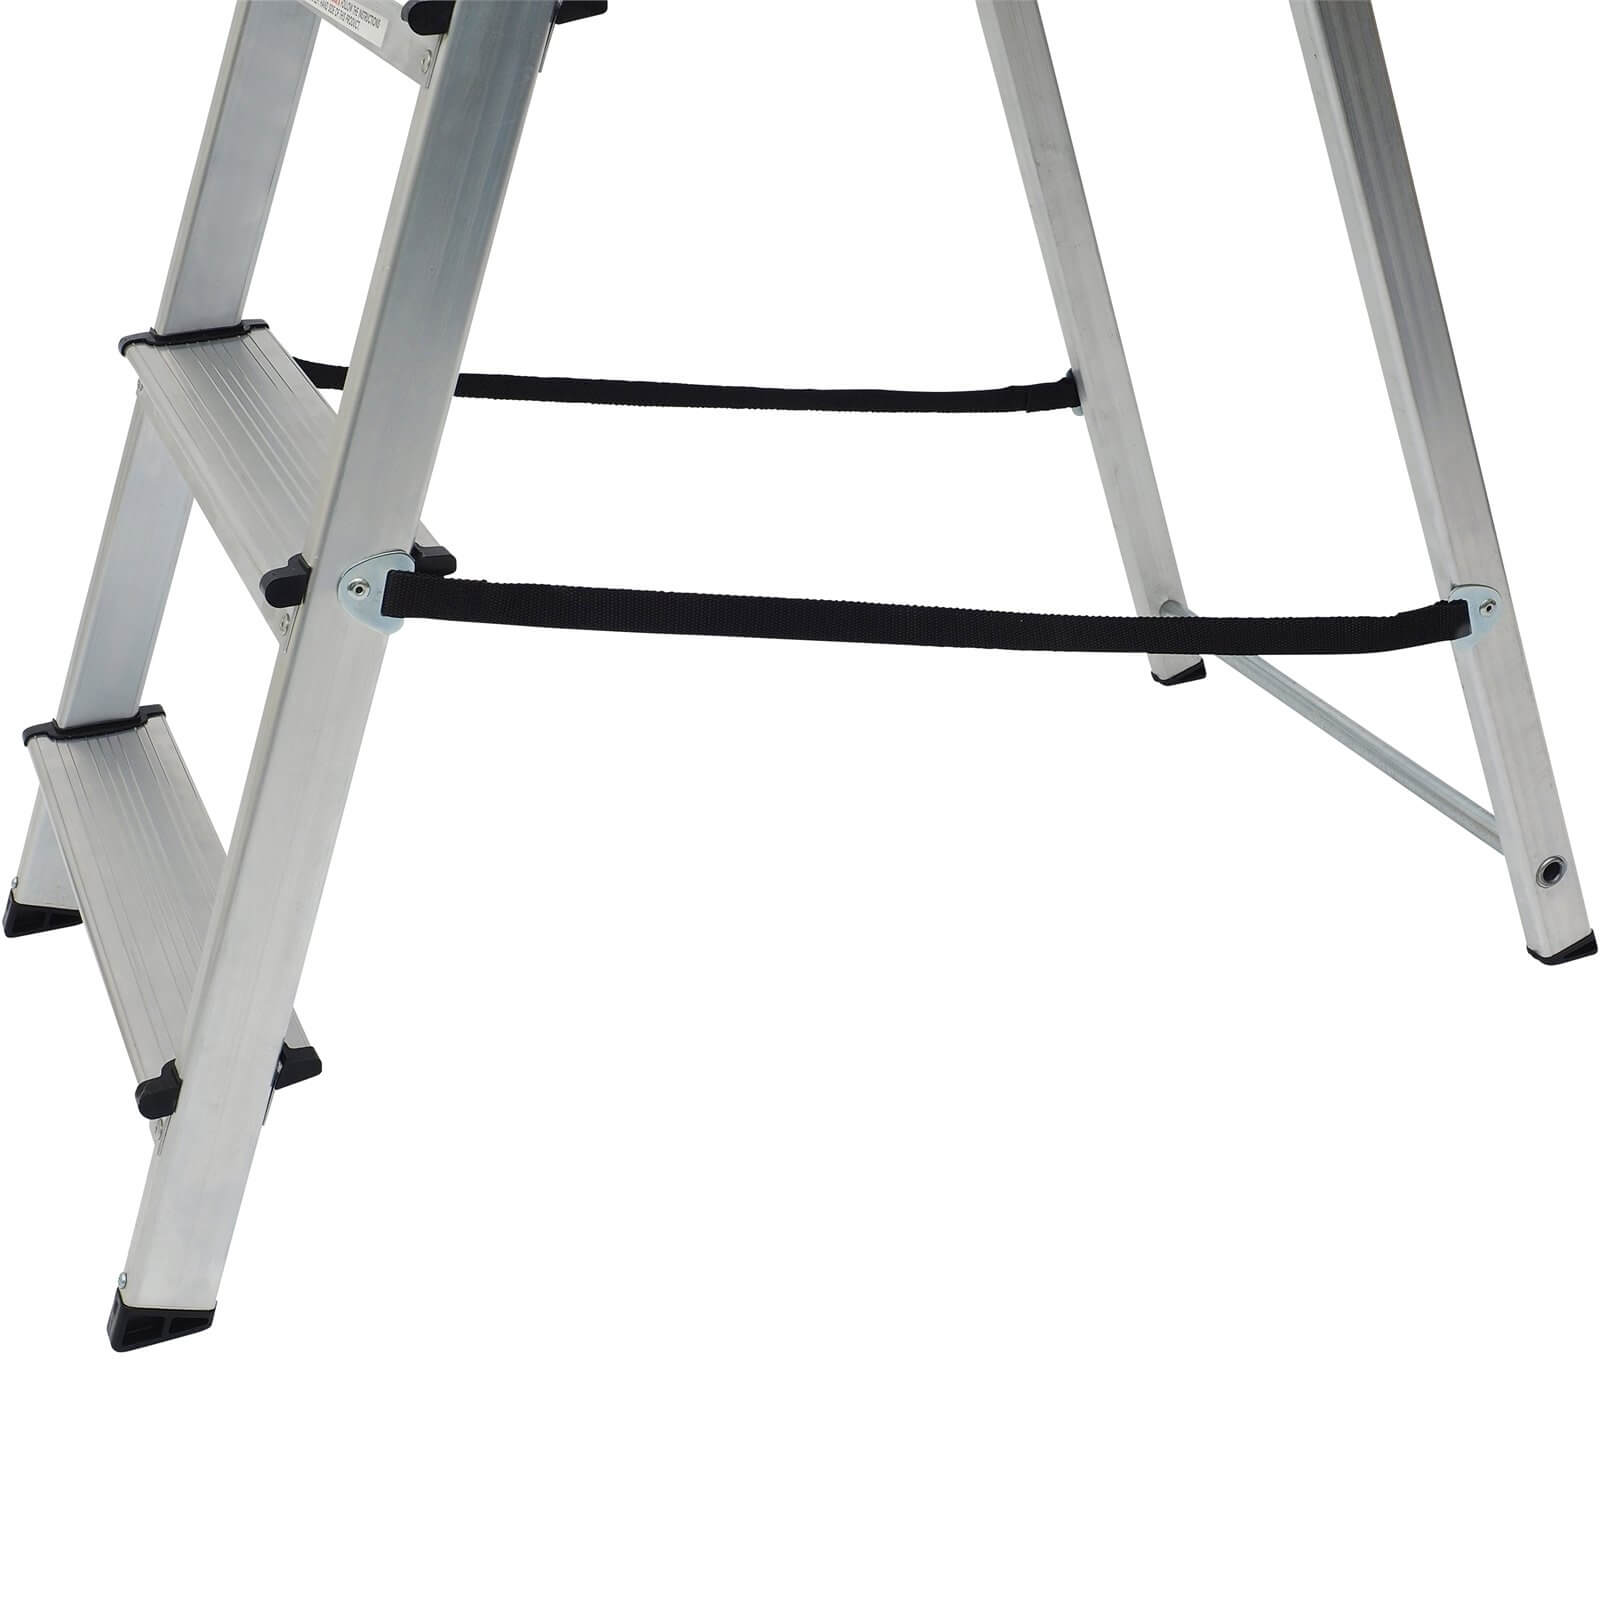 Werner High Handrail Step Ladder with Tool Tray - 5 Tread